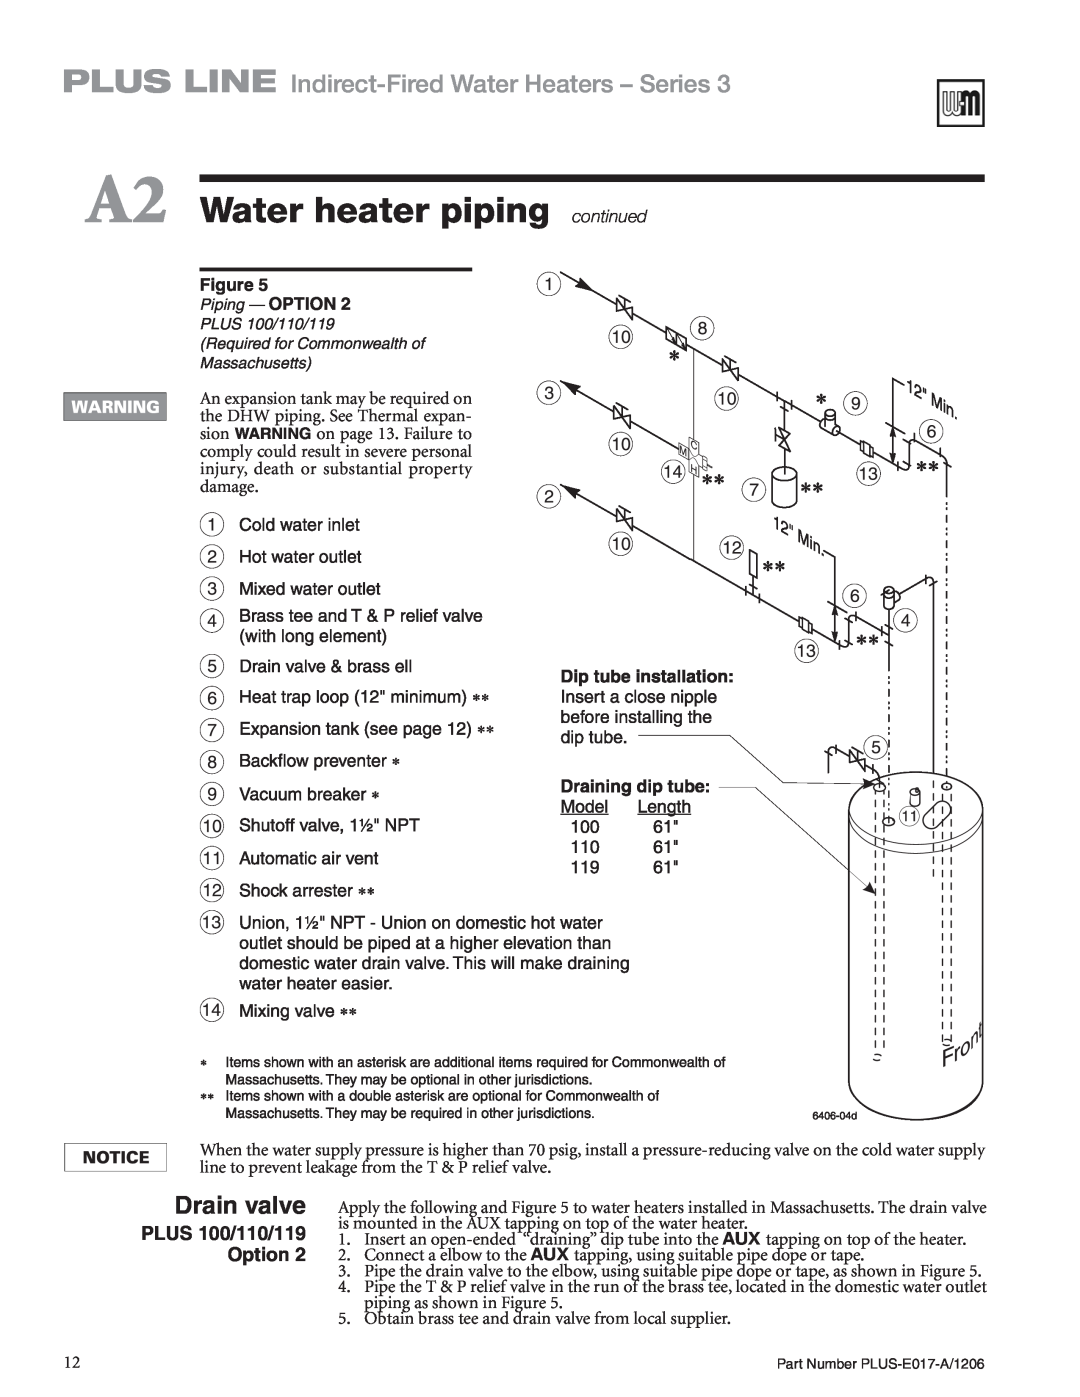 Weil-McLain PLUS-E017-A/1206 A2 Water heater pipingcontinued, PLUS LINE Indirect-FiredWater Heaters - Series, Drain valve 